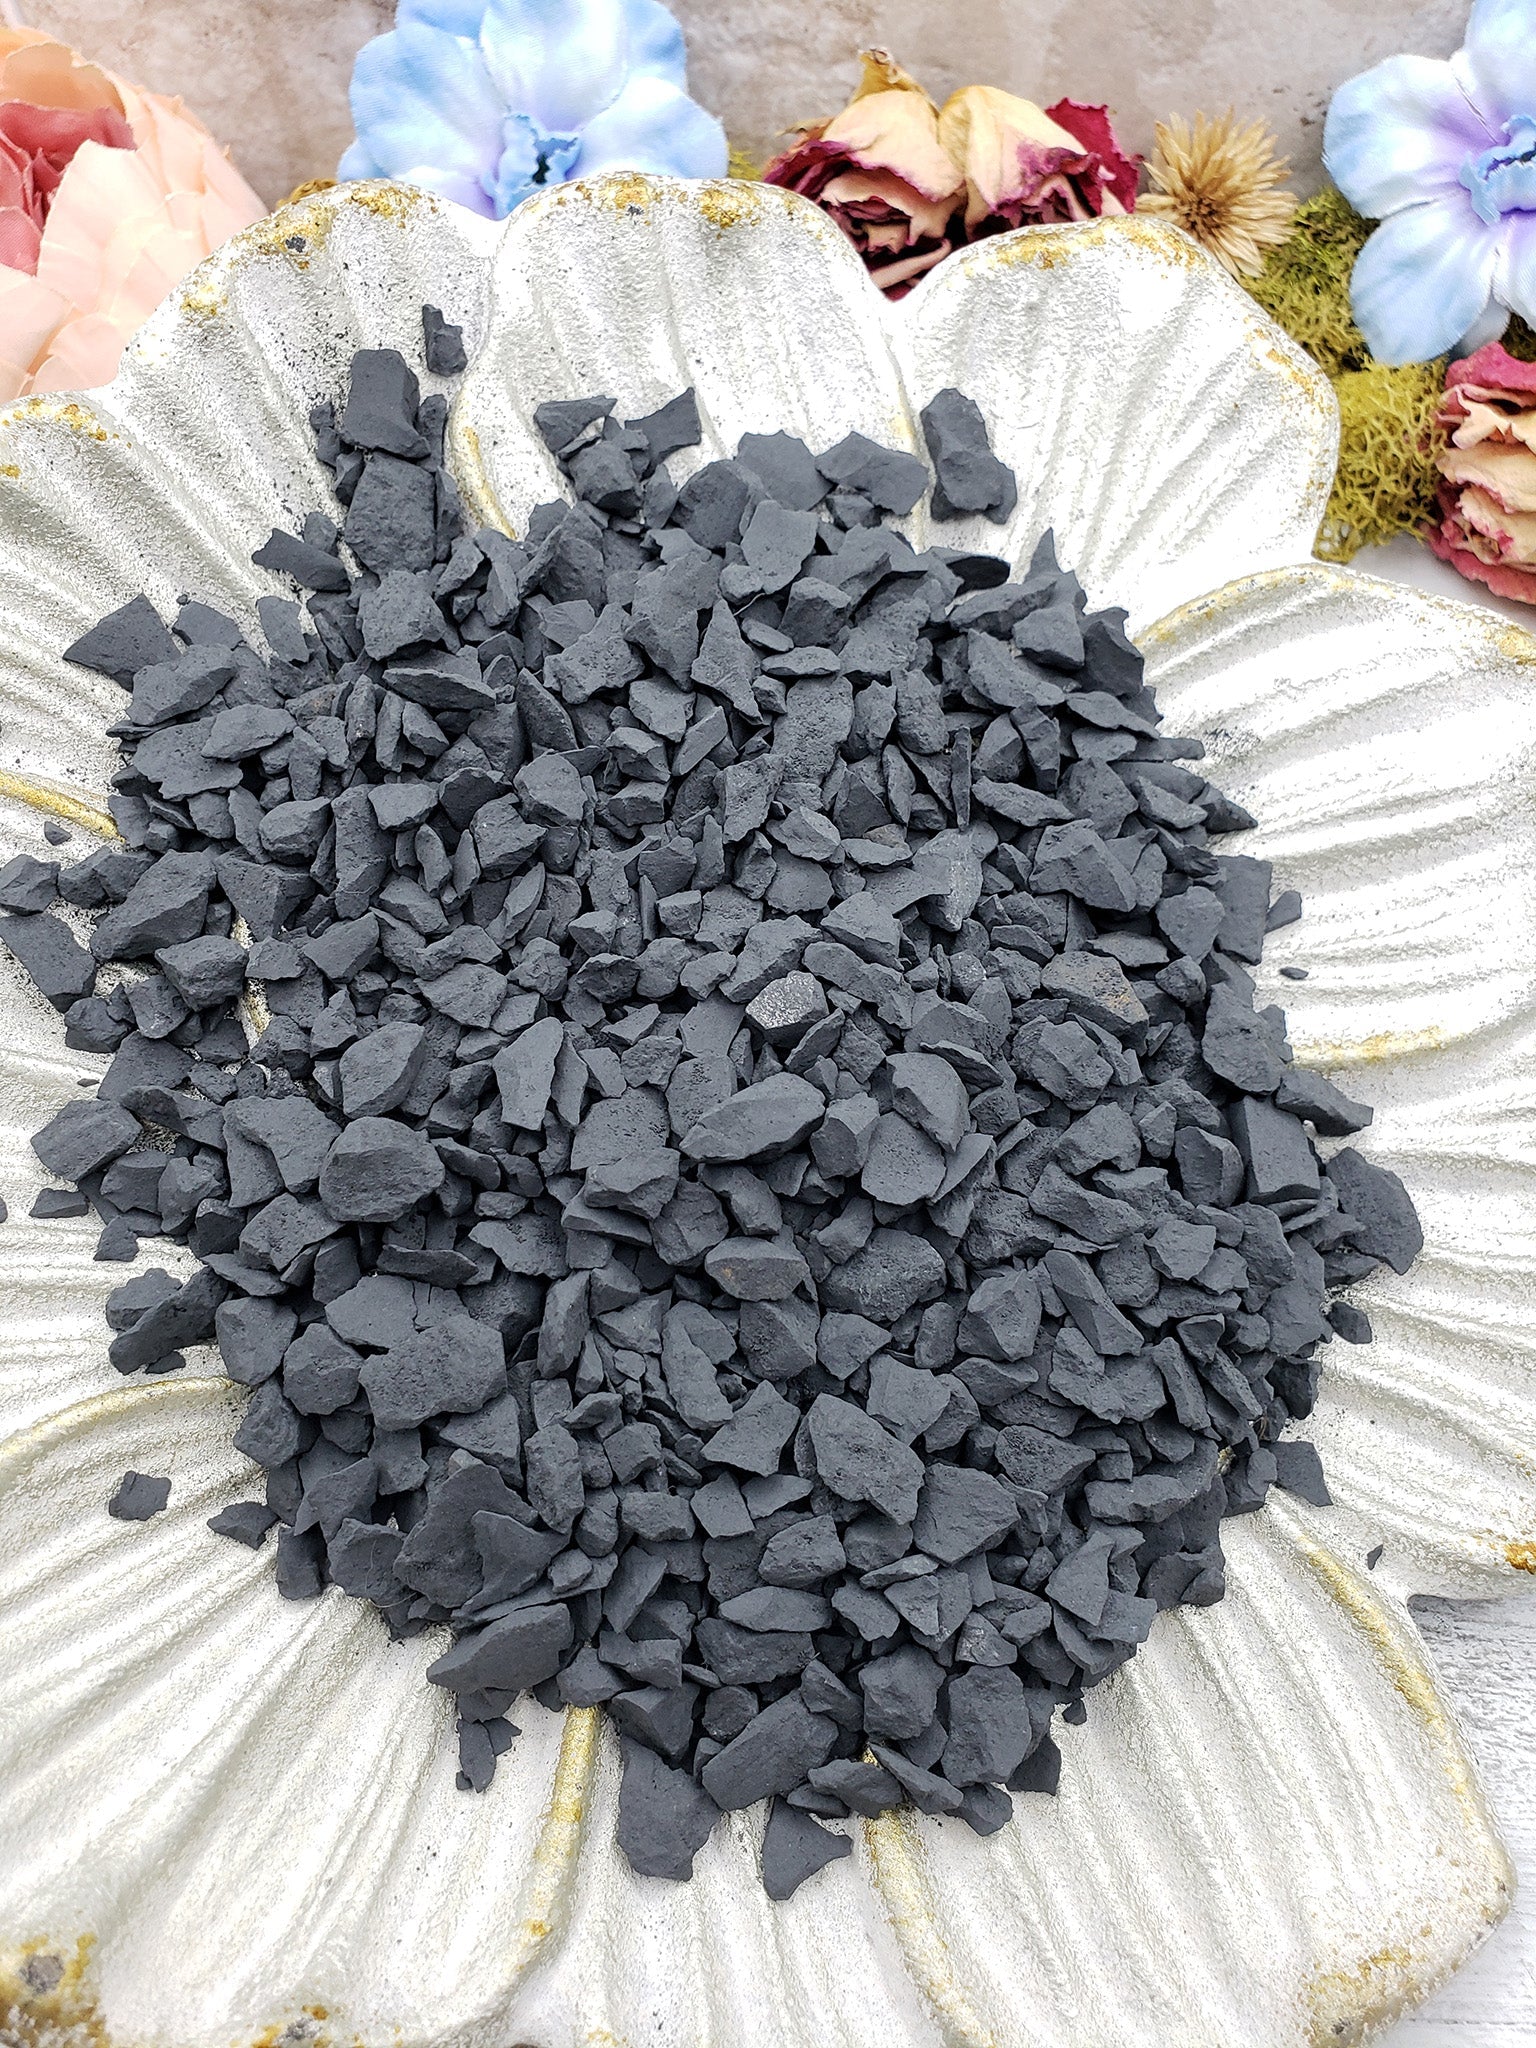 rough shungite stone chips on floral dish display